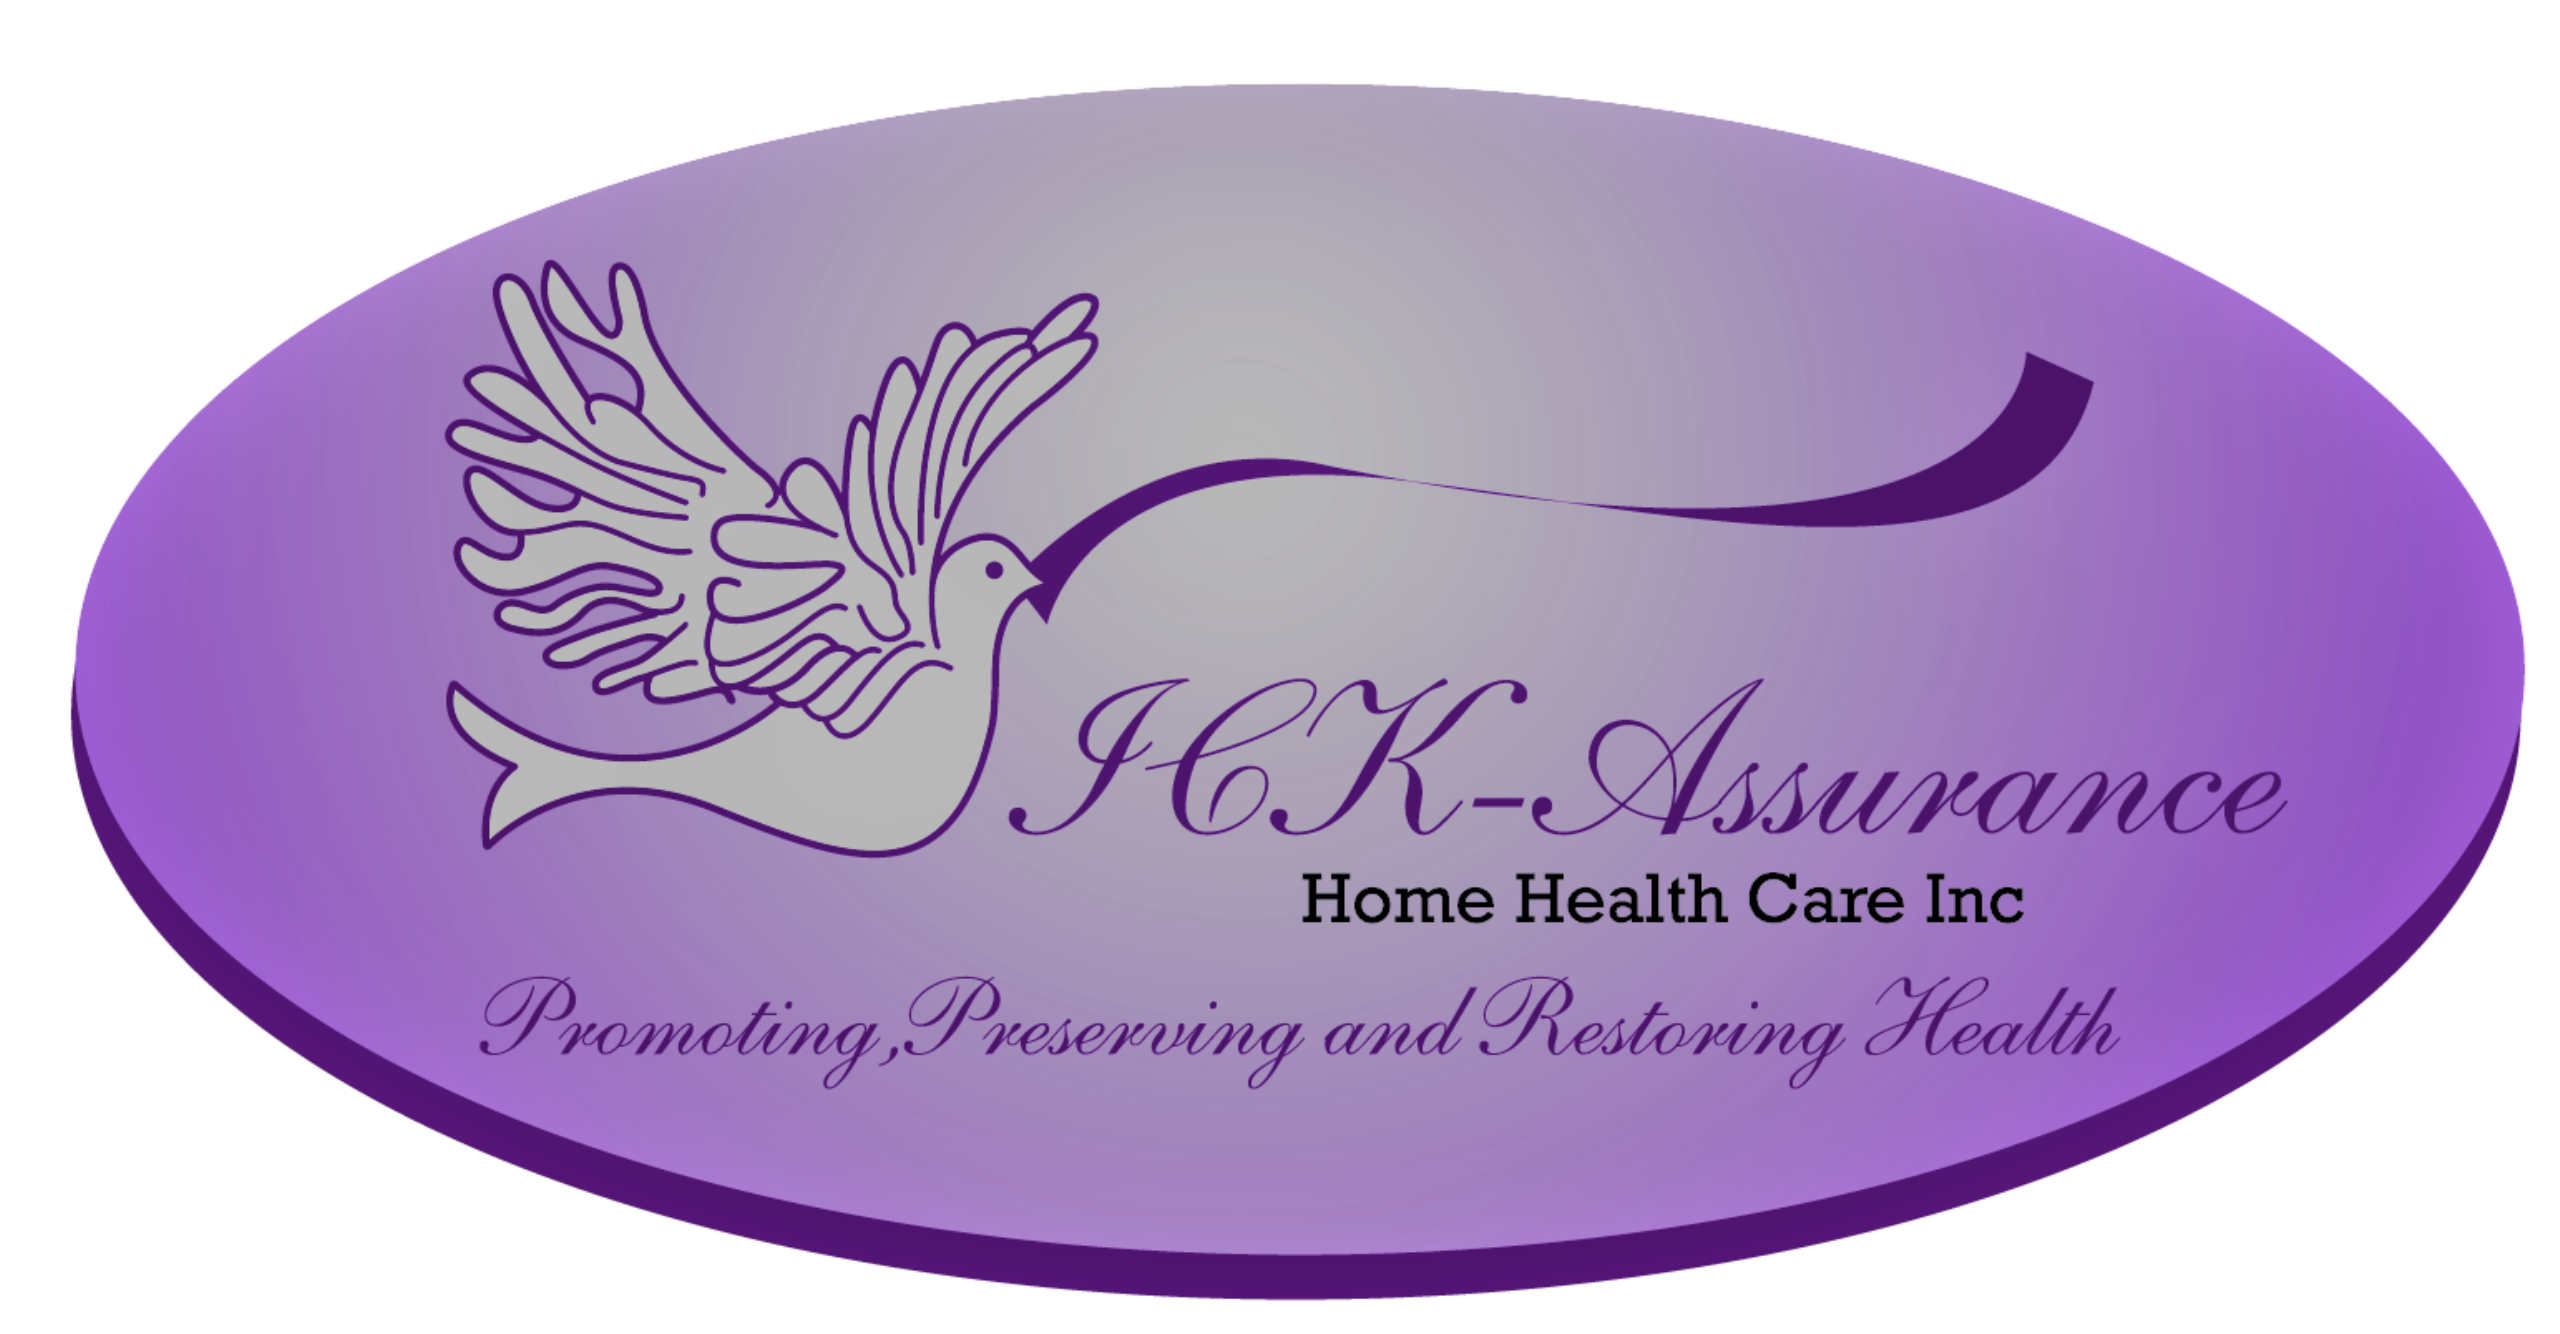 ICK- Assurance Home Health Care Incorporated Logo